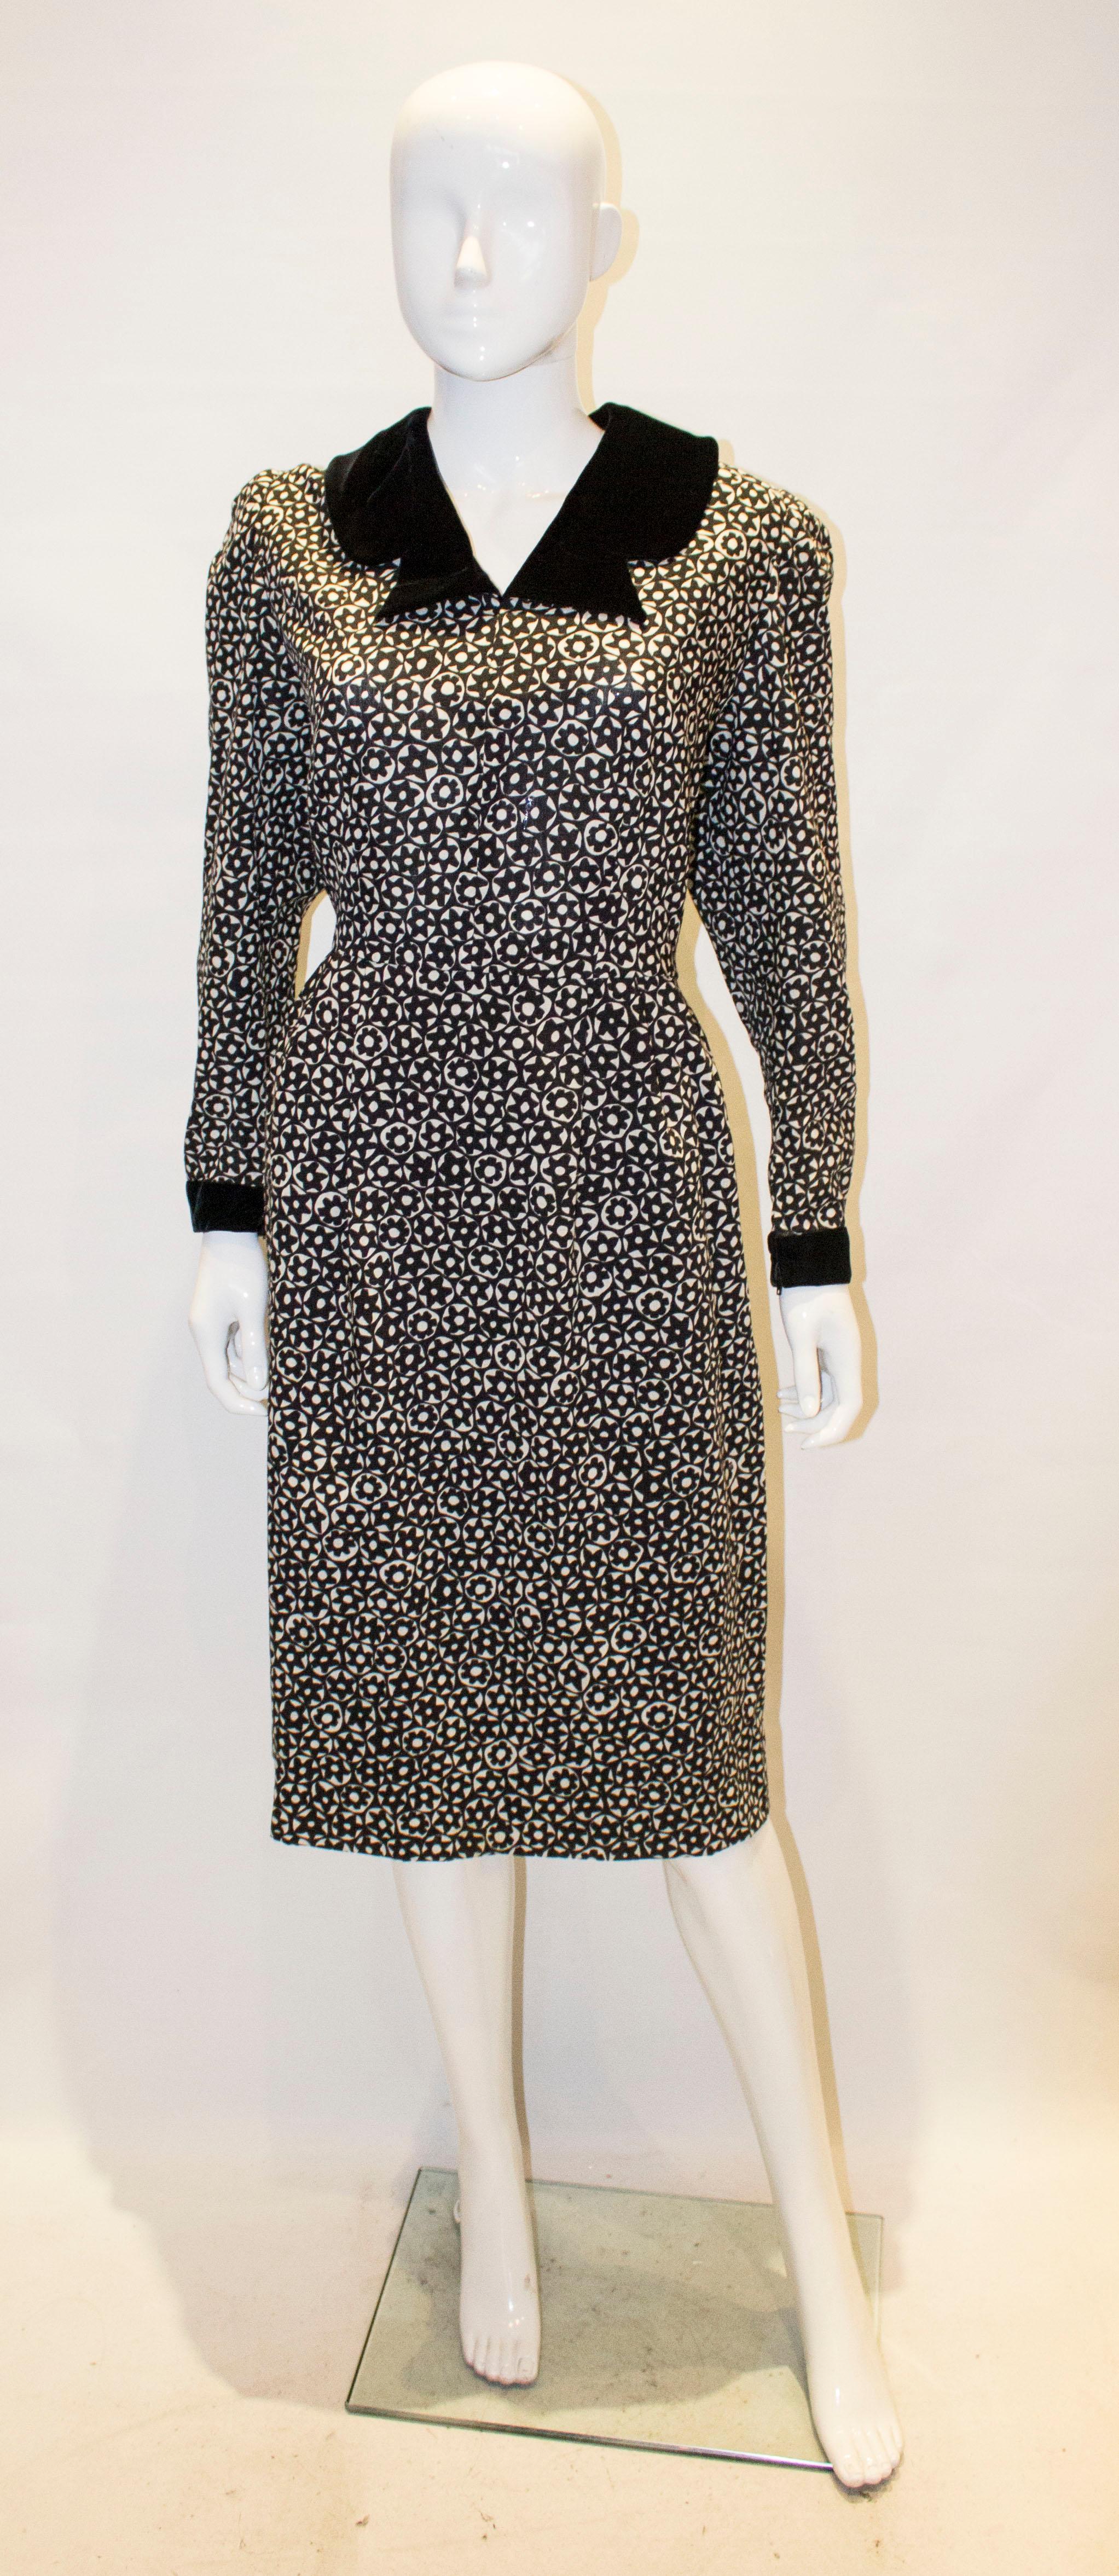 A chic vintage dress  by Donald Campbell. The dress is in a black and white wool print with interesting velvet cut away collar and cuff.s It has a central back zip, and is fully lined .

